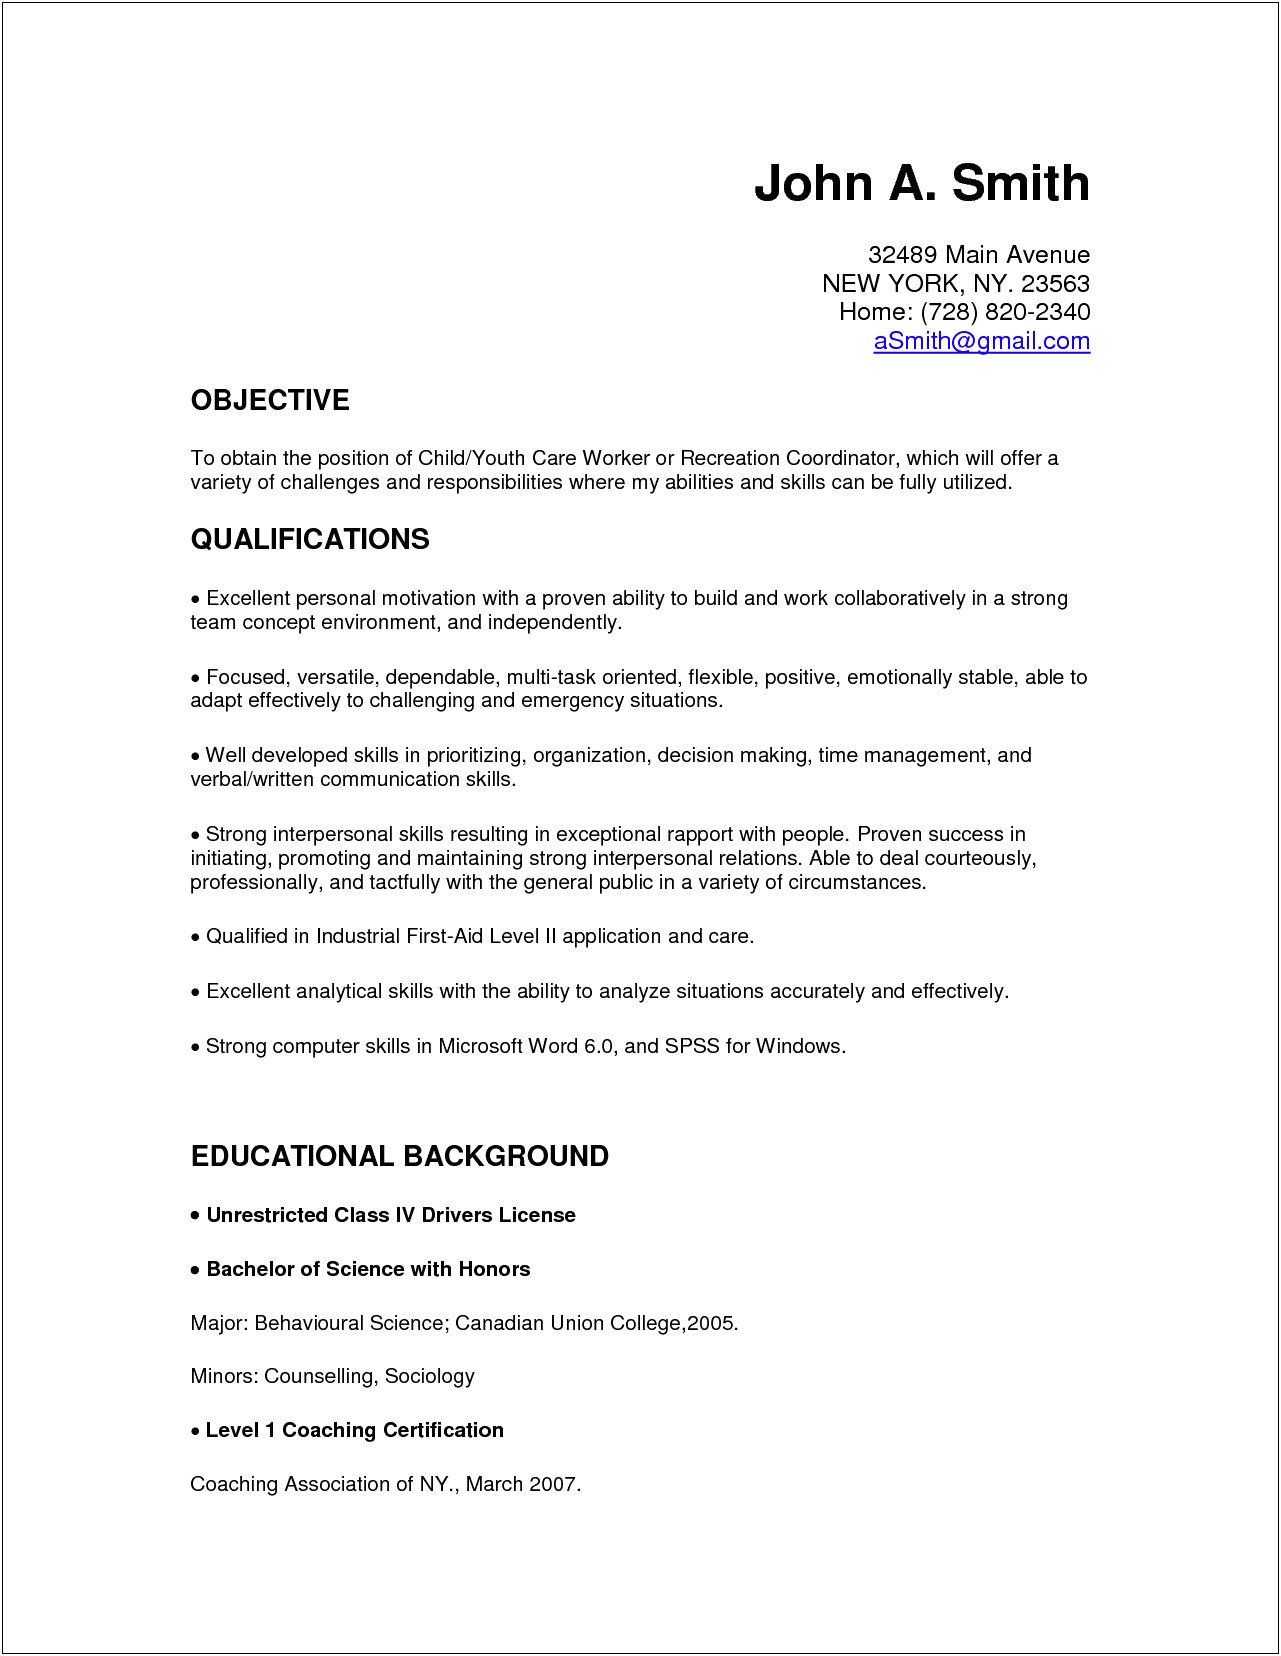 Resume Objective For Daycare Worker